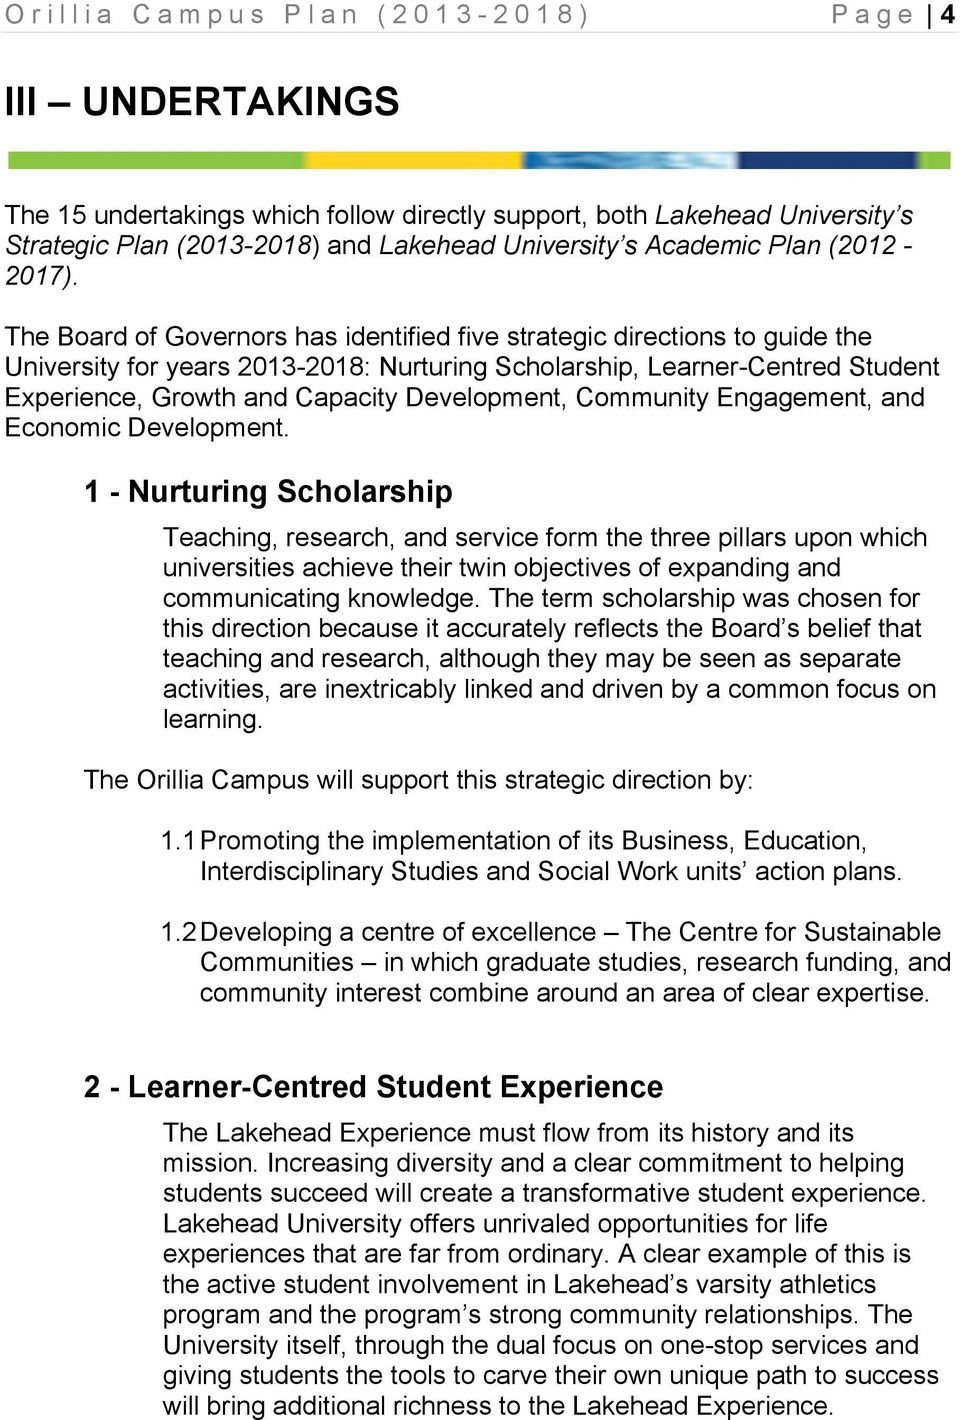 The Board of Governors has identified five strategic directions to guide the University for years 2013-2018: Nurturing Scholarship, Learner-Centred Student Experience, Growth and Capacity